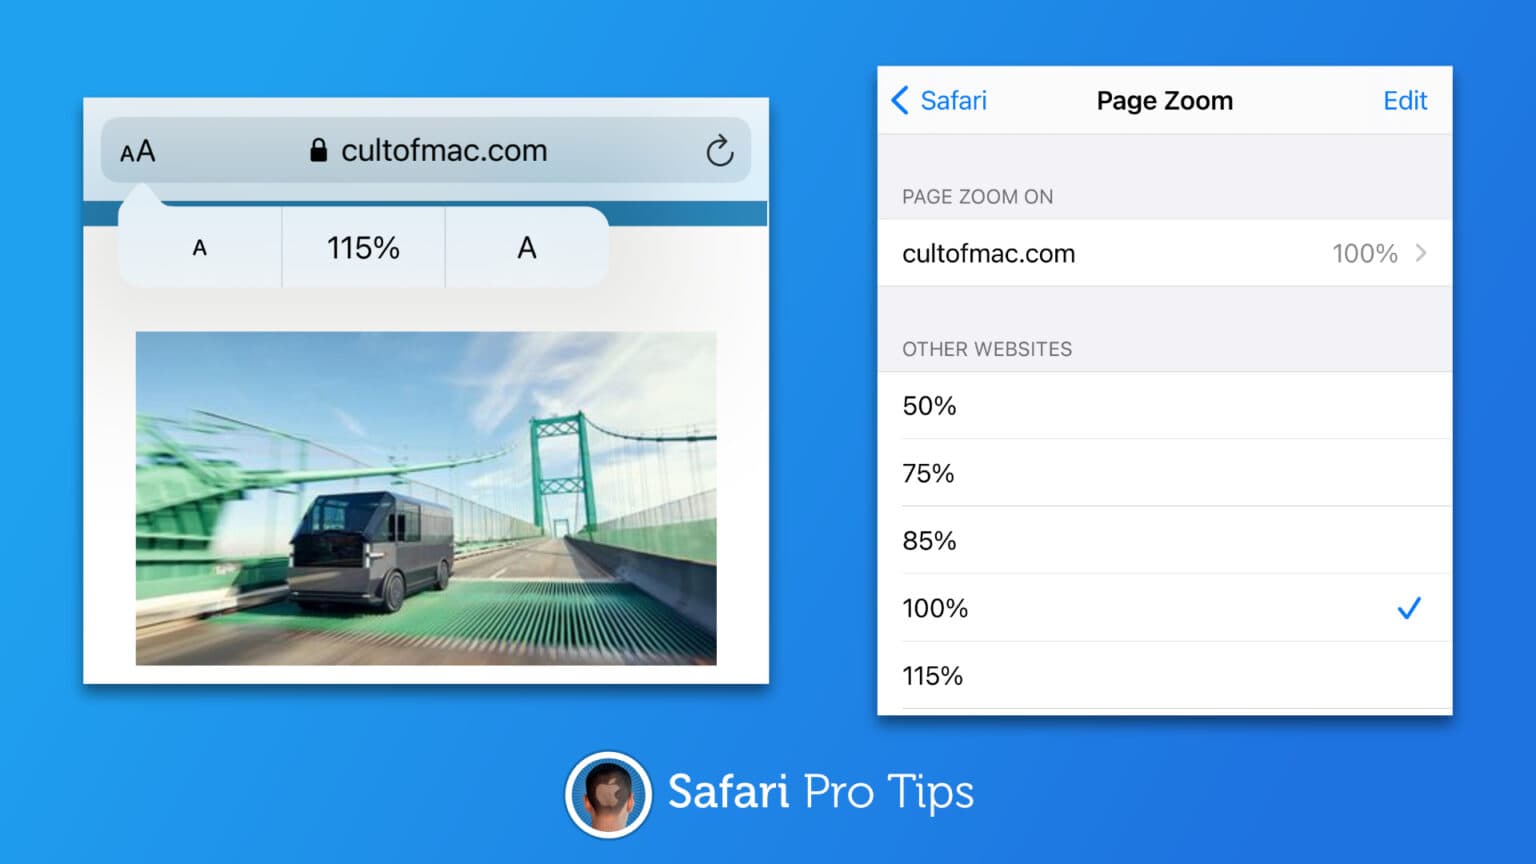 How to enable Page Zoom in Safari